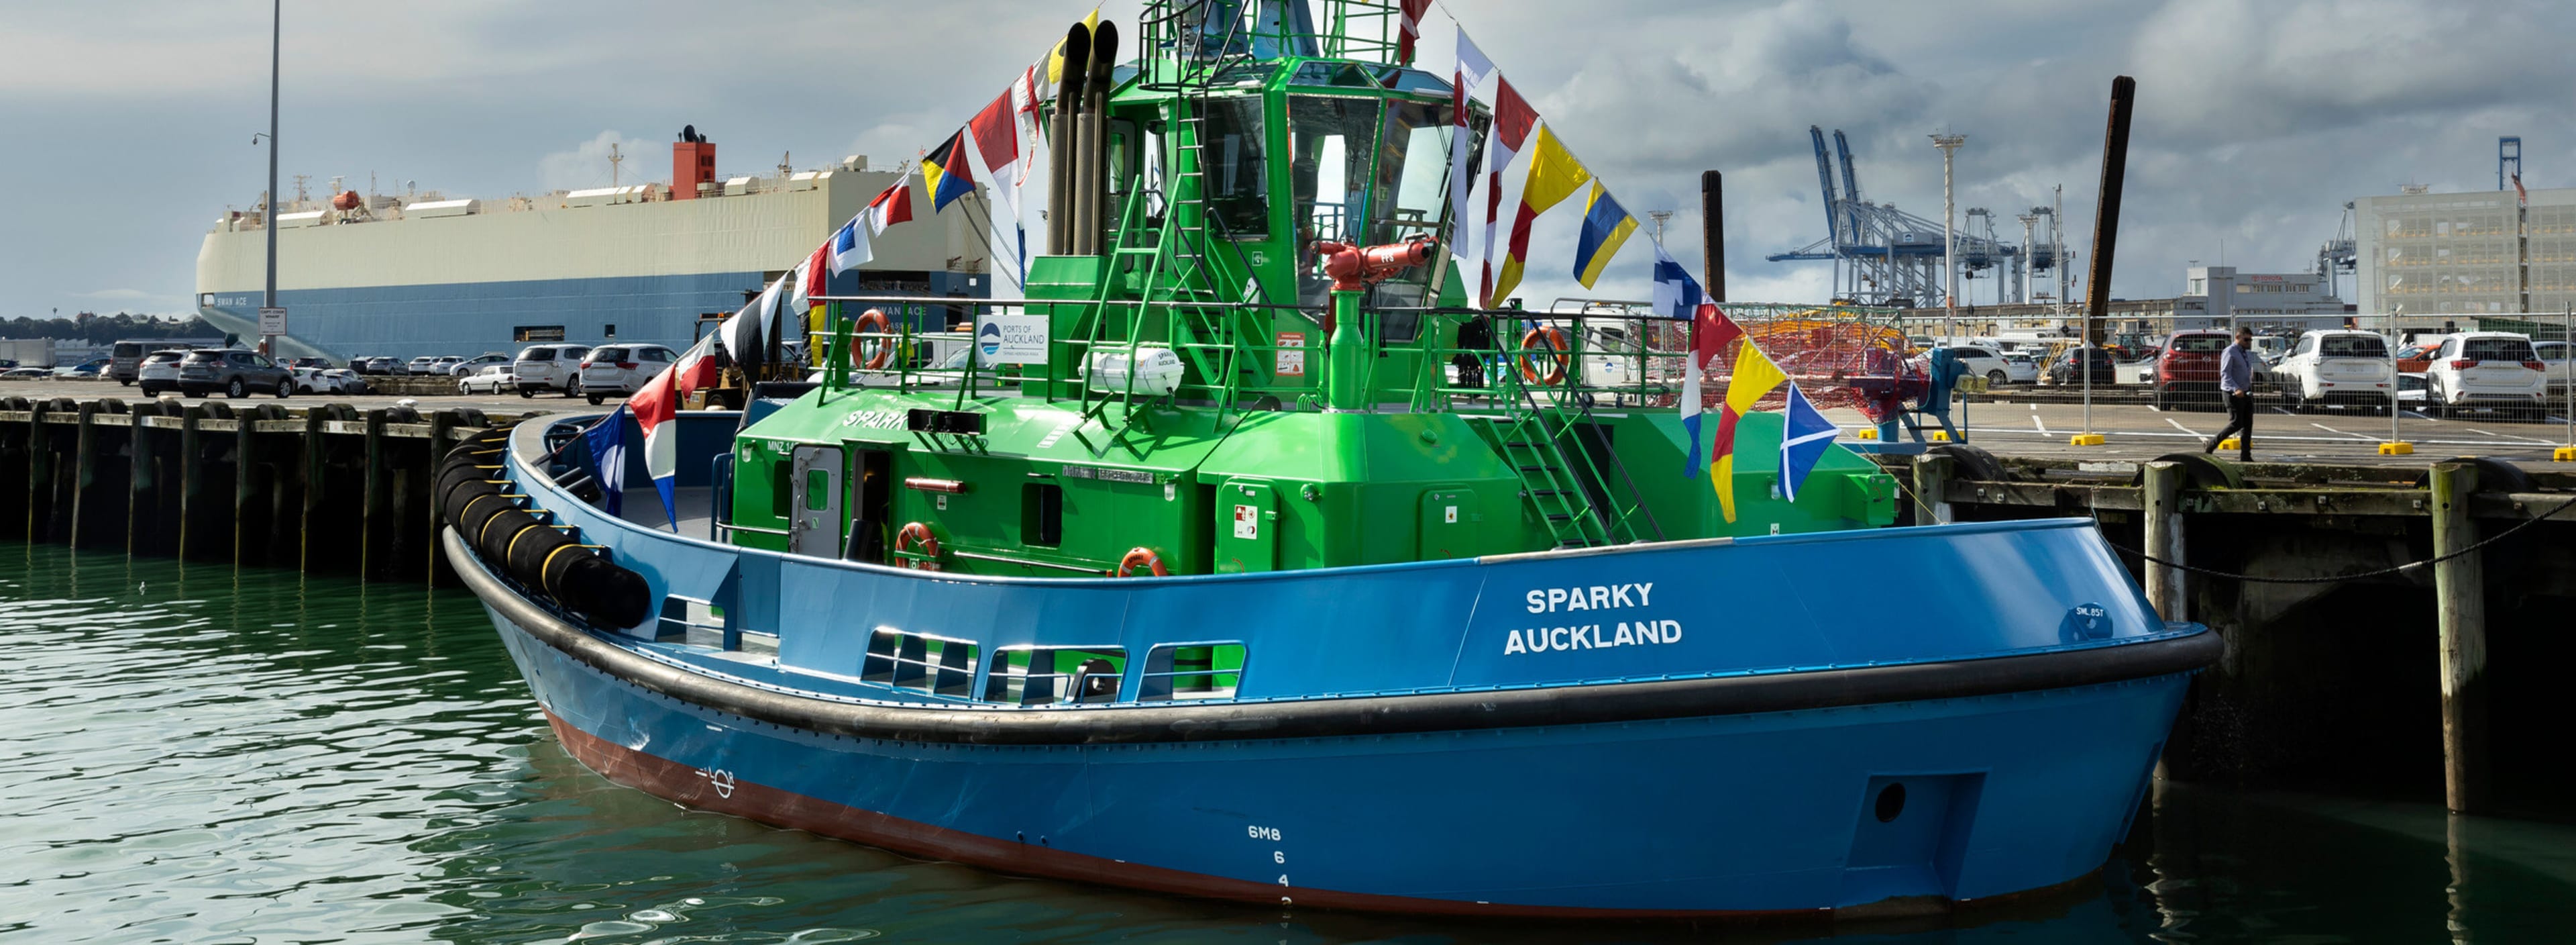 Damen's first all-electric tug Sparky delivered to Ports of